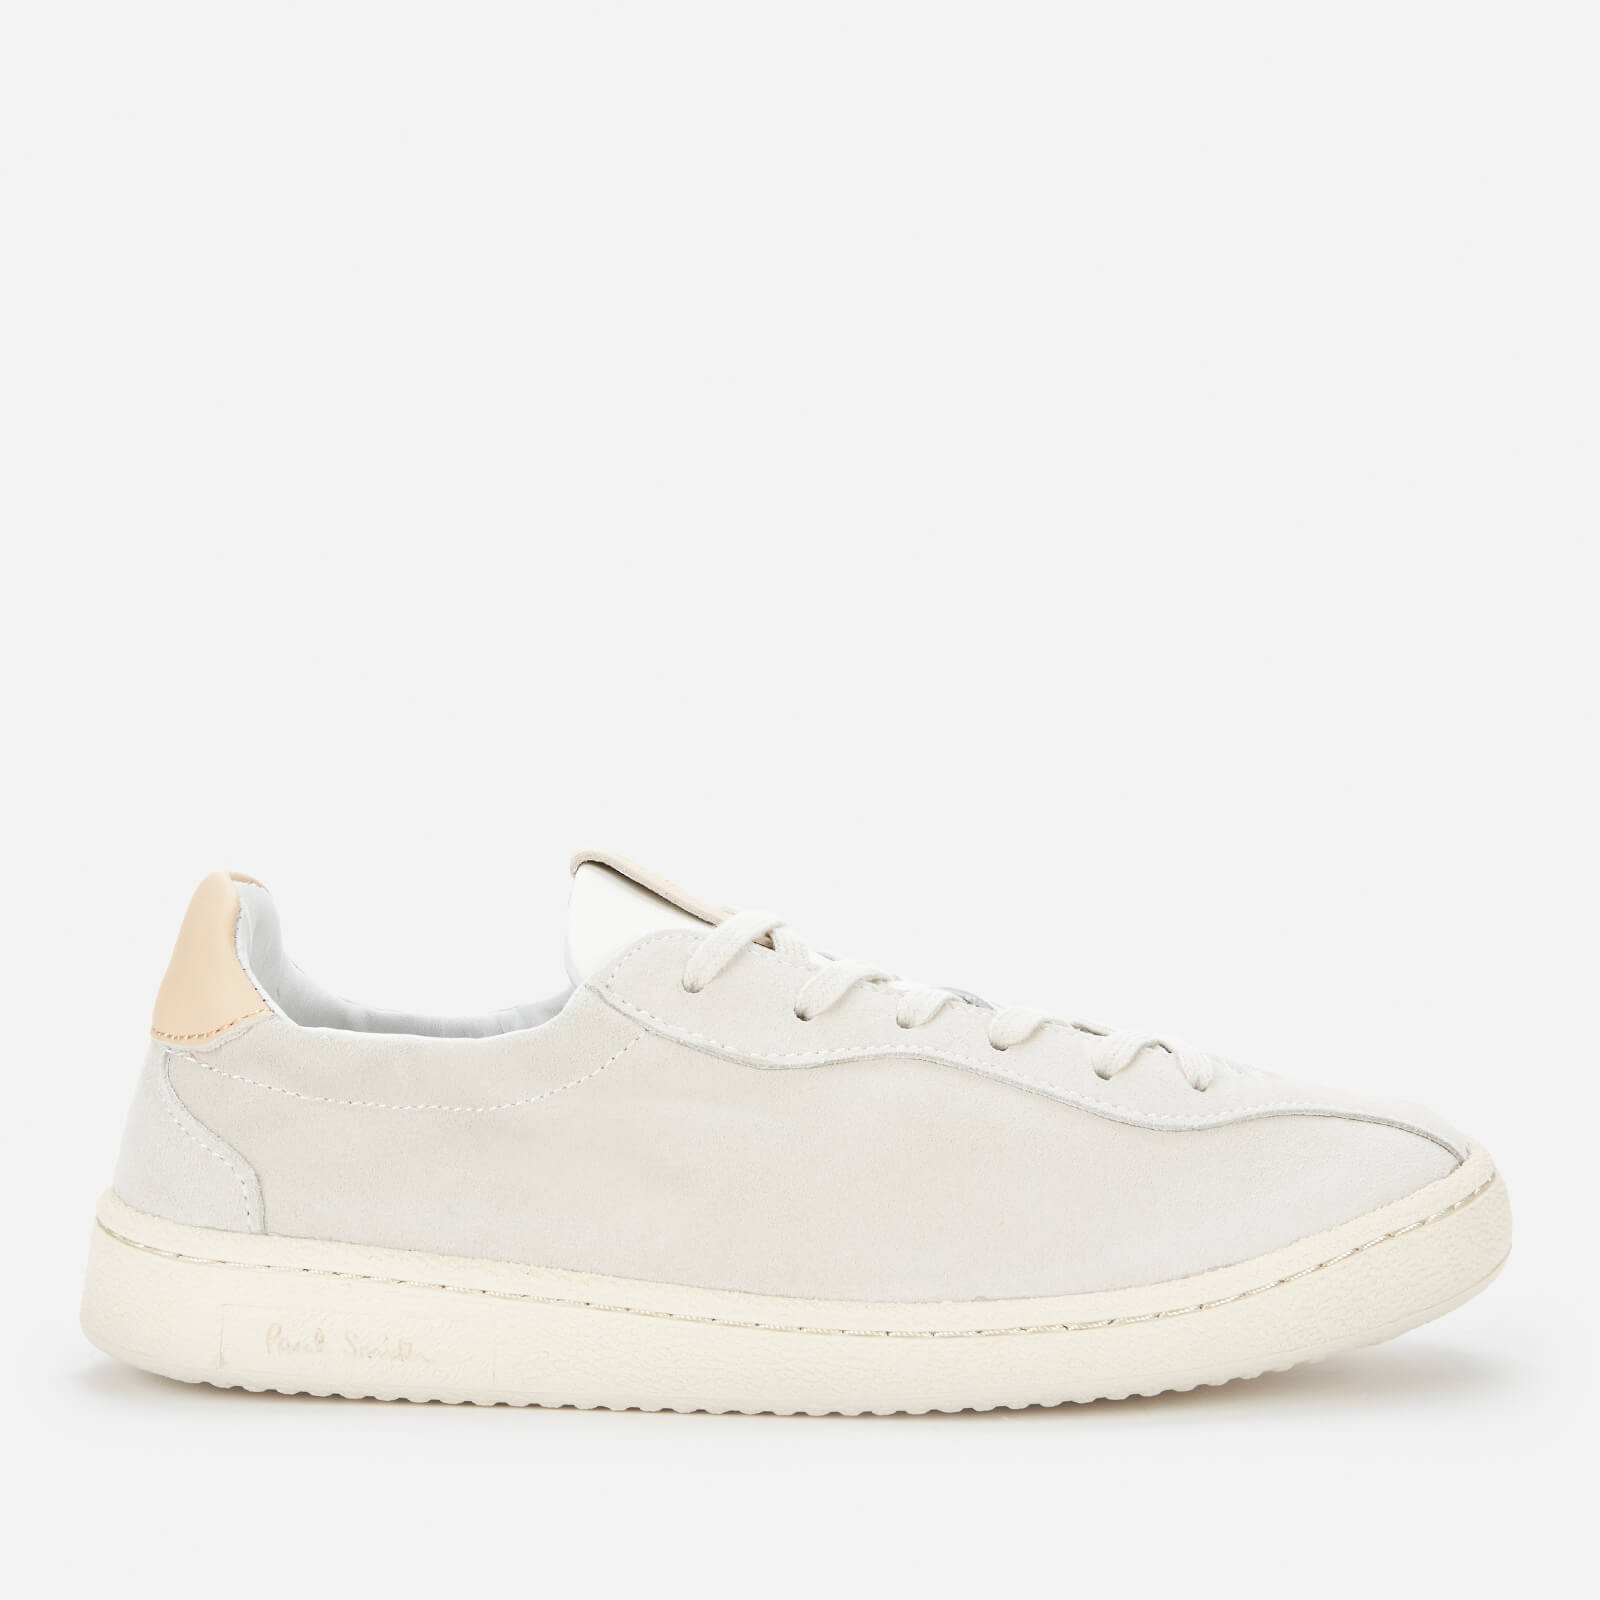 Paul Smith Women's Wilson Suede Low Top Trainers - Off White - UK 3